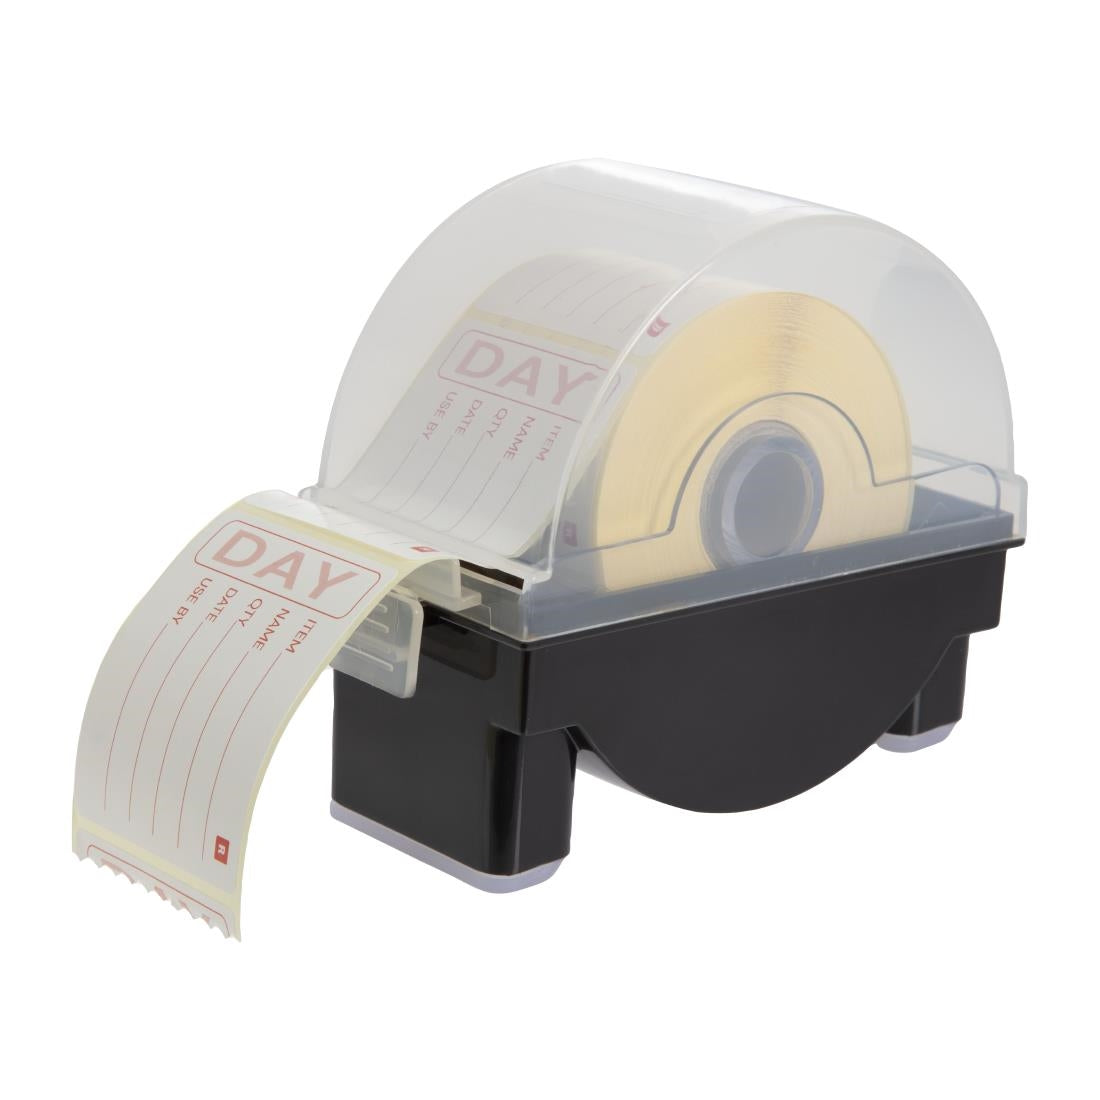 2 Inch Vogue Prepared Day Labels with Dispenser (Pack of 500) JD Catering Equipment Solutions Ltd